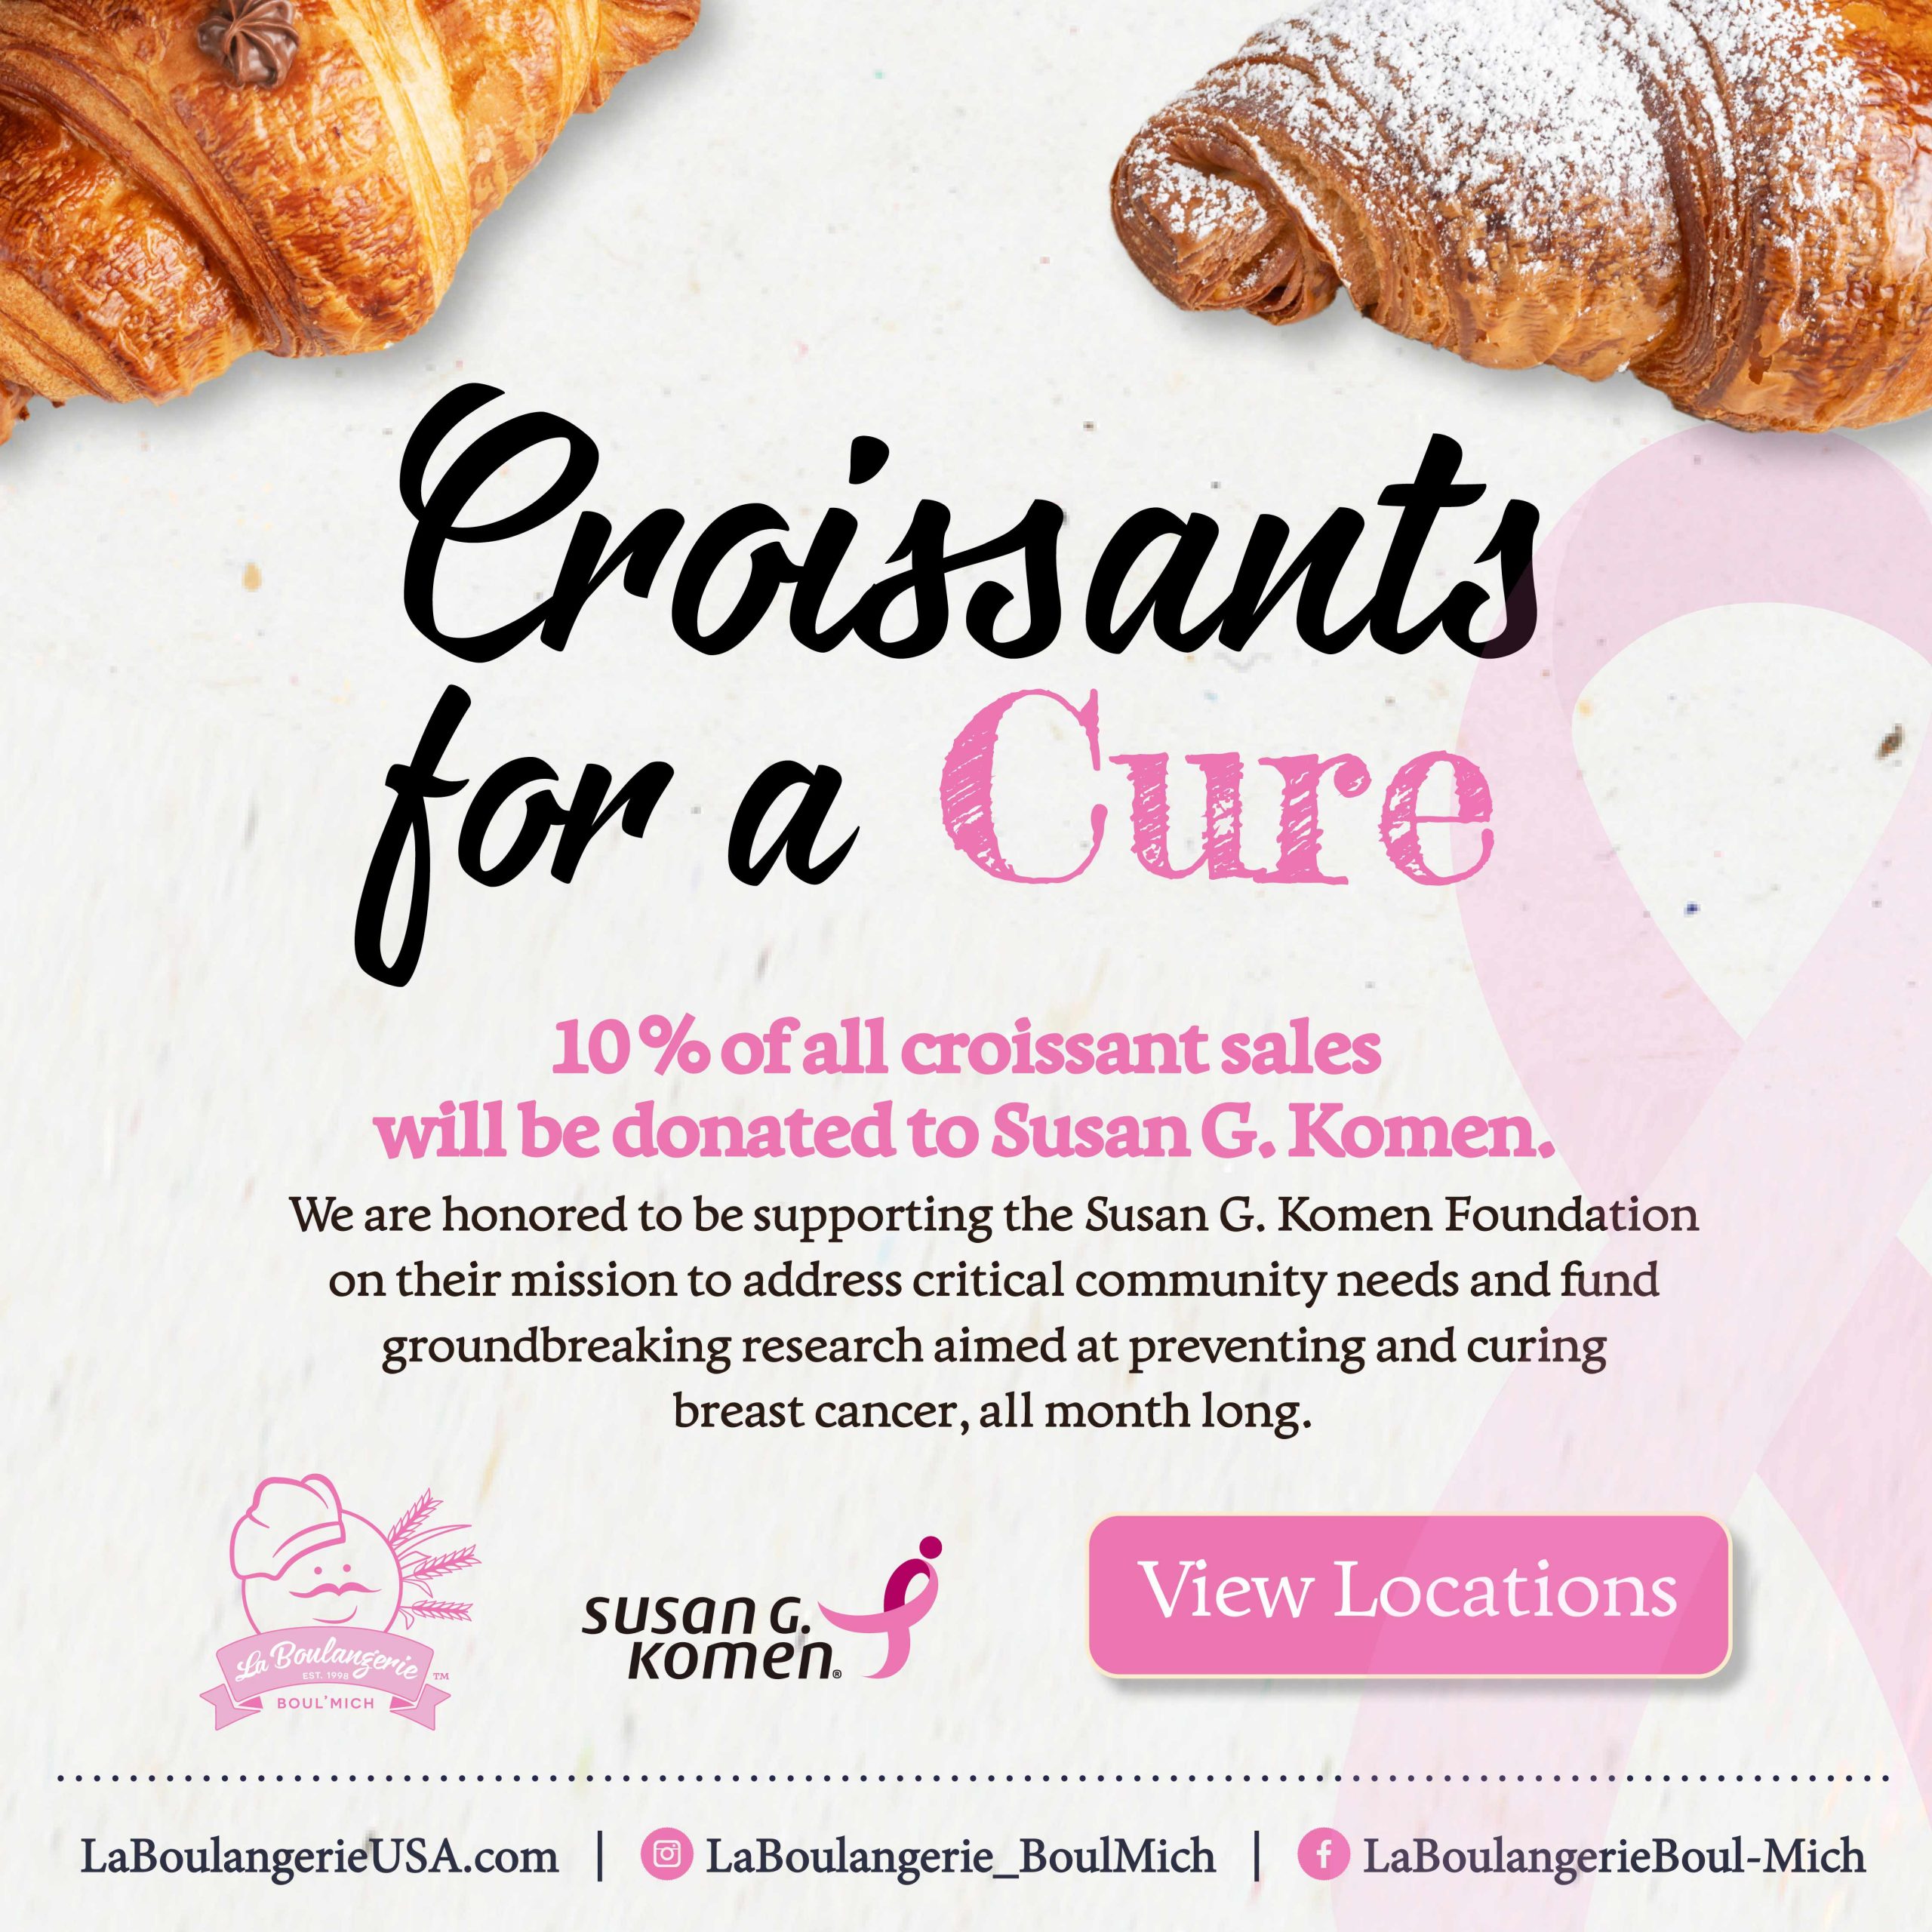 La Boulangerie Boul'Mich has partnered with Susan G Komen to help raise money for breast cancer research.